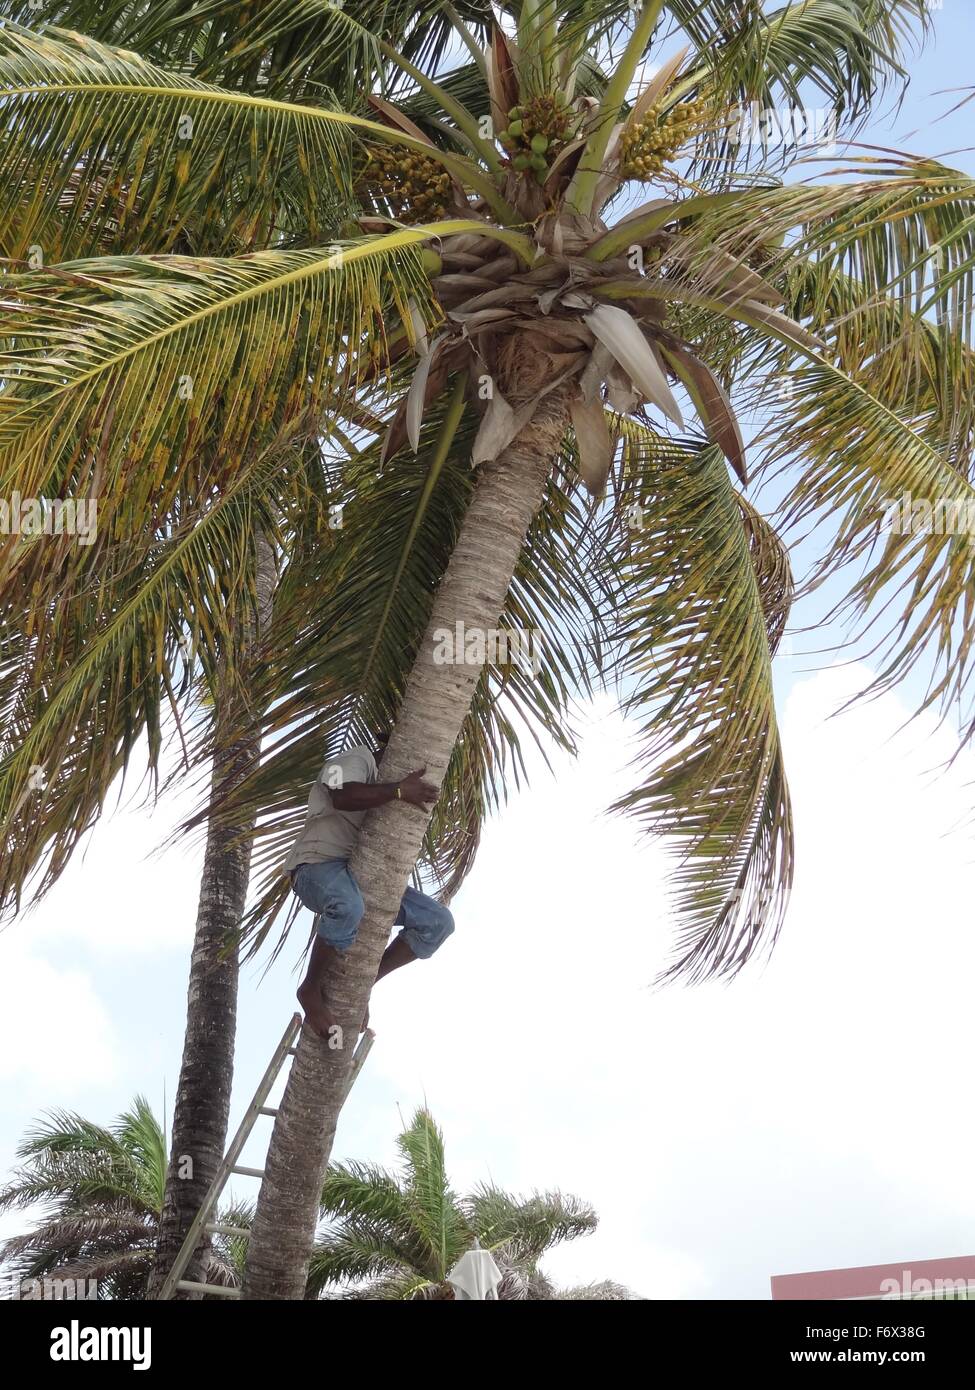 Man climbing up a palm tree to get coconuts Stock Photo